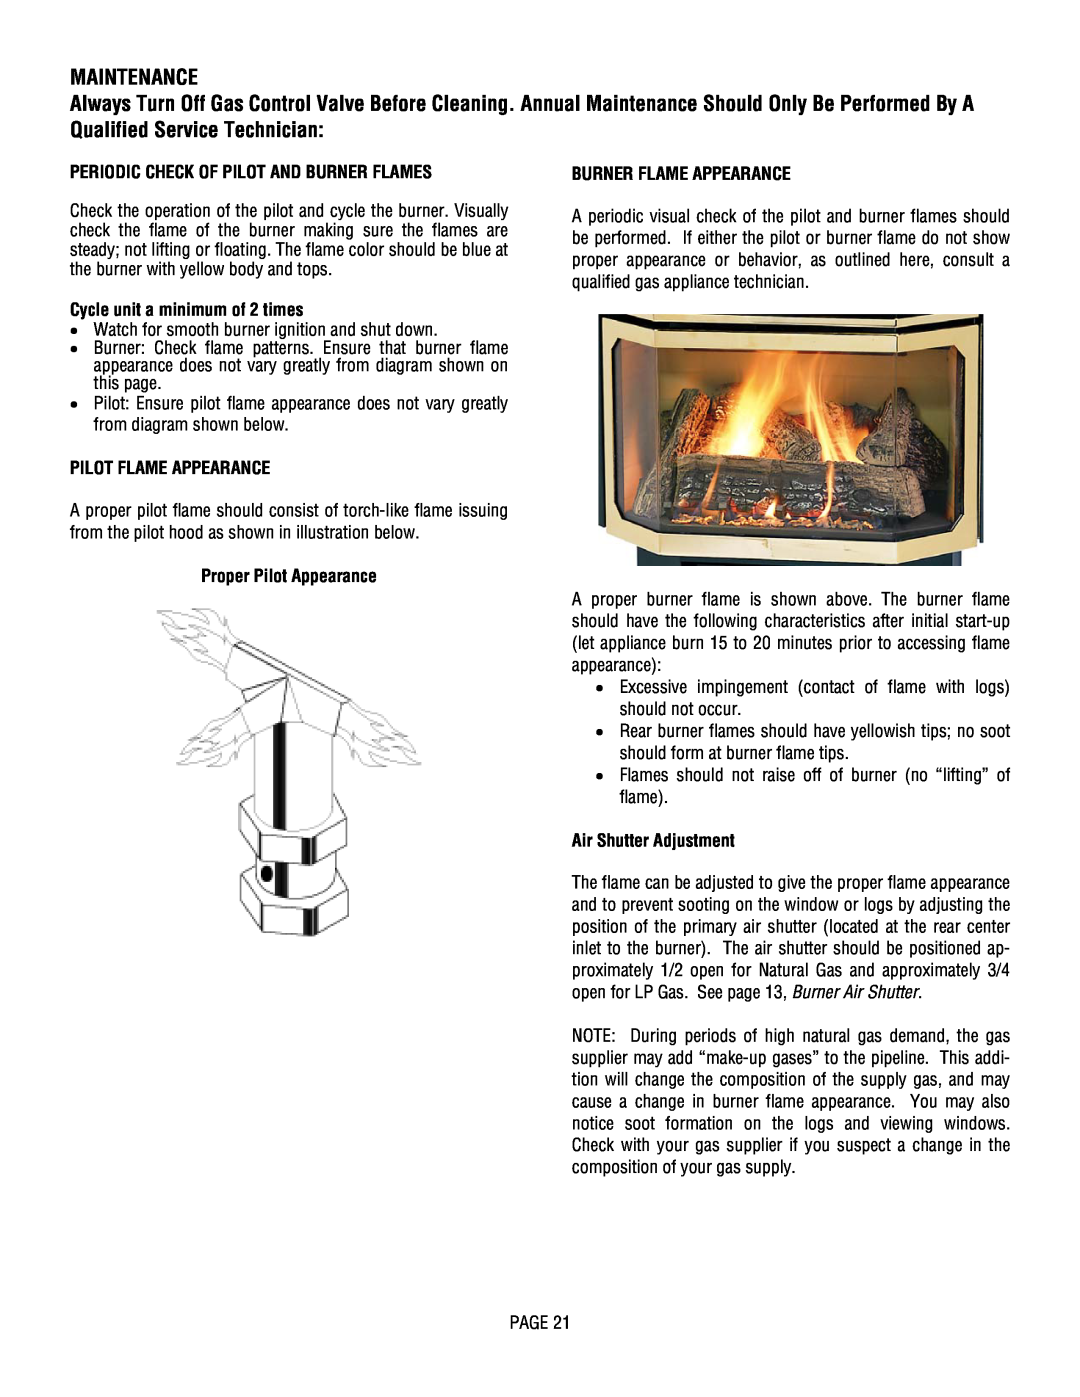 Lennox Hearth L30 DVF-2 Maintenance, Periodic Check Of Pilot And Burner Flames, Cycle unit a minimum of 2 times 